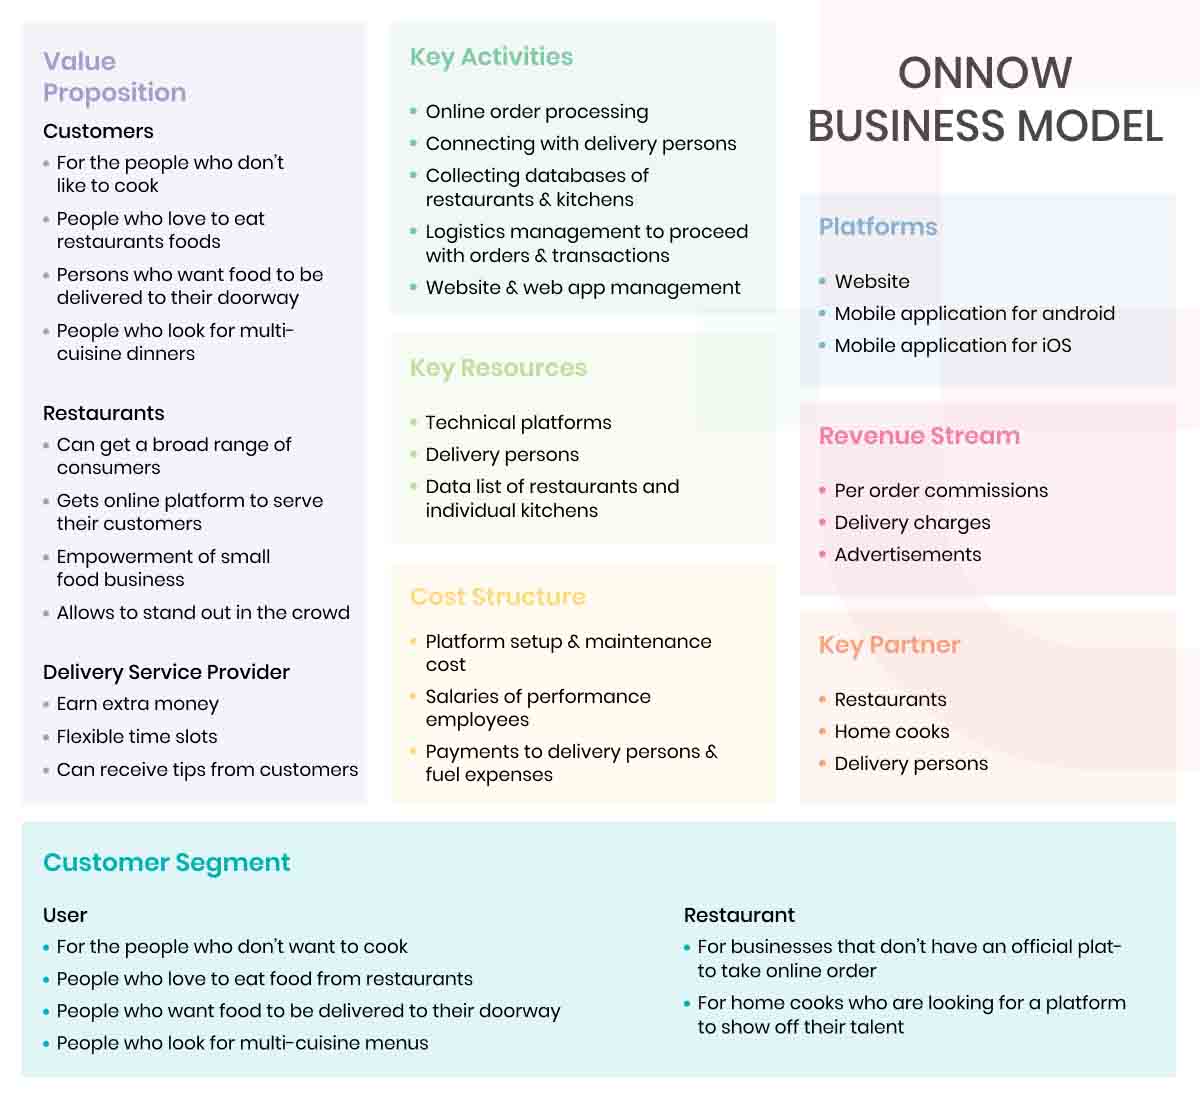 onnow business model